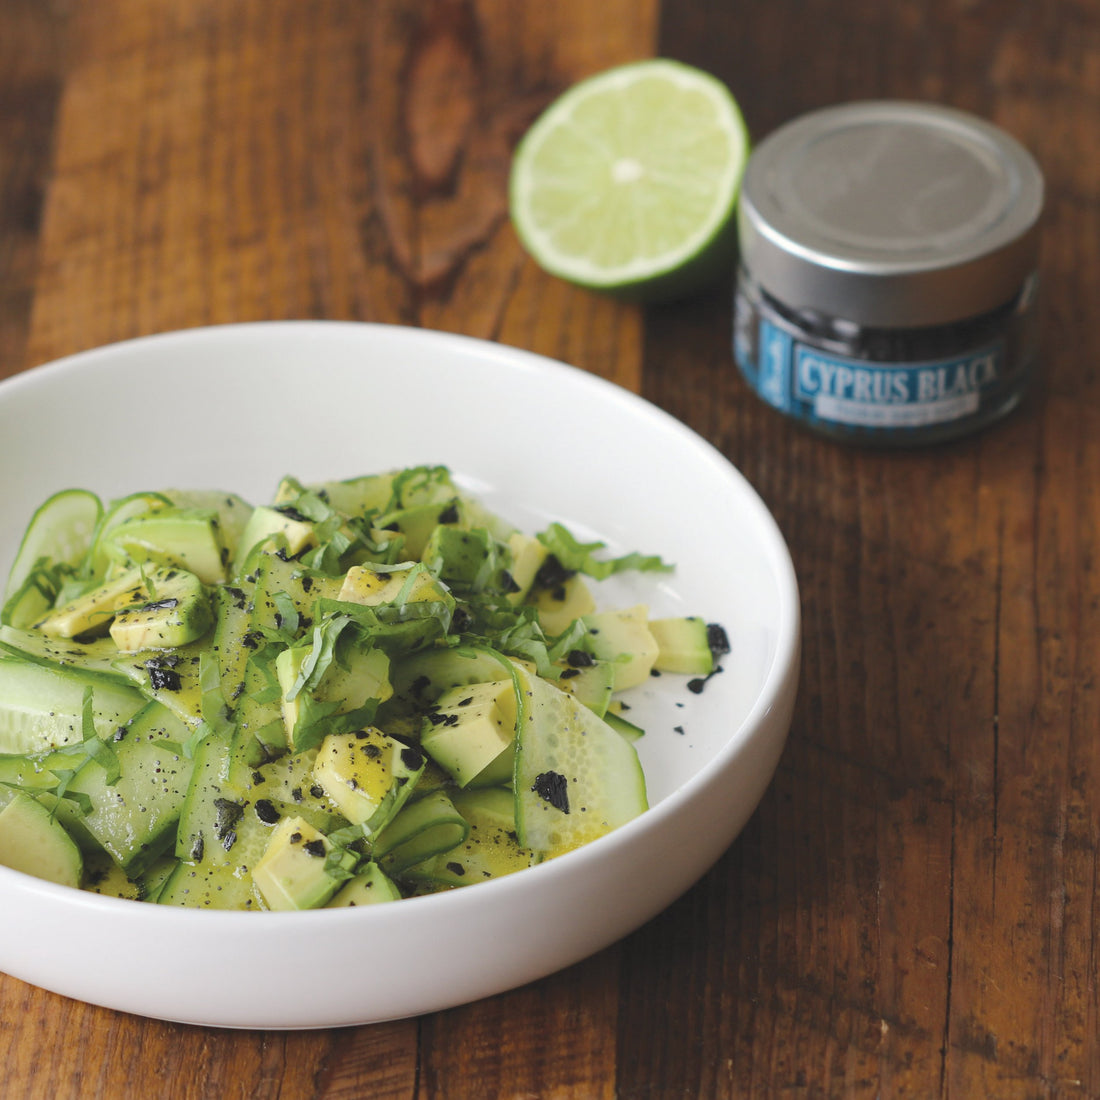 Cucumber and Avocado Salad with Tequila Poppy Seed Vinaigrette